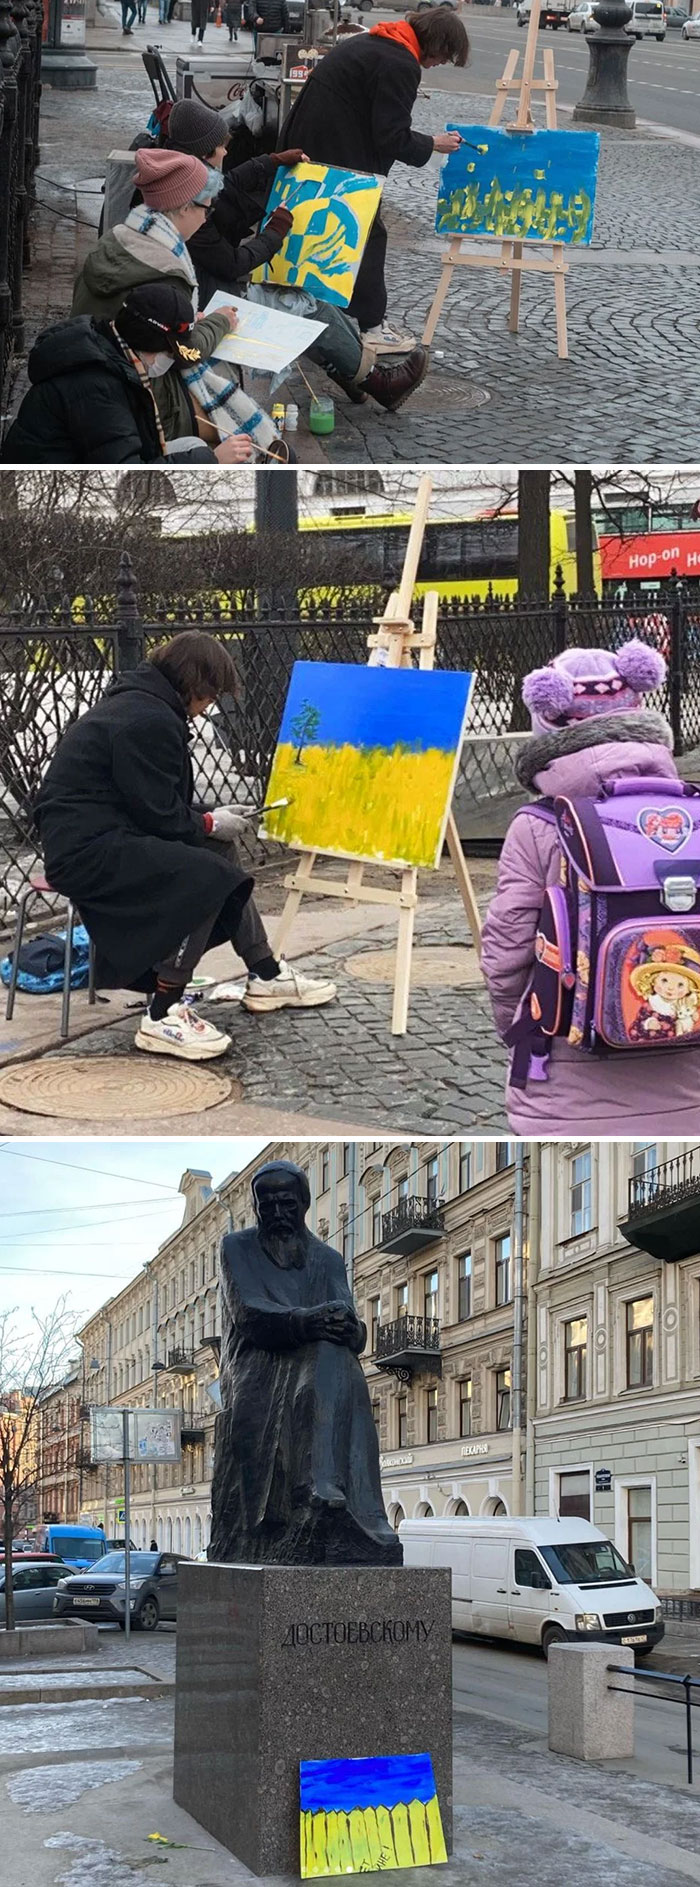 Unauthorized Protests Are Forbidden In Russia, So Artists In St. Petersburg Decided To Do Some Open-Air Practice